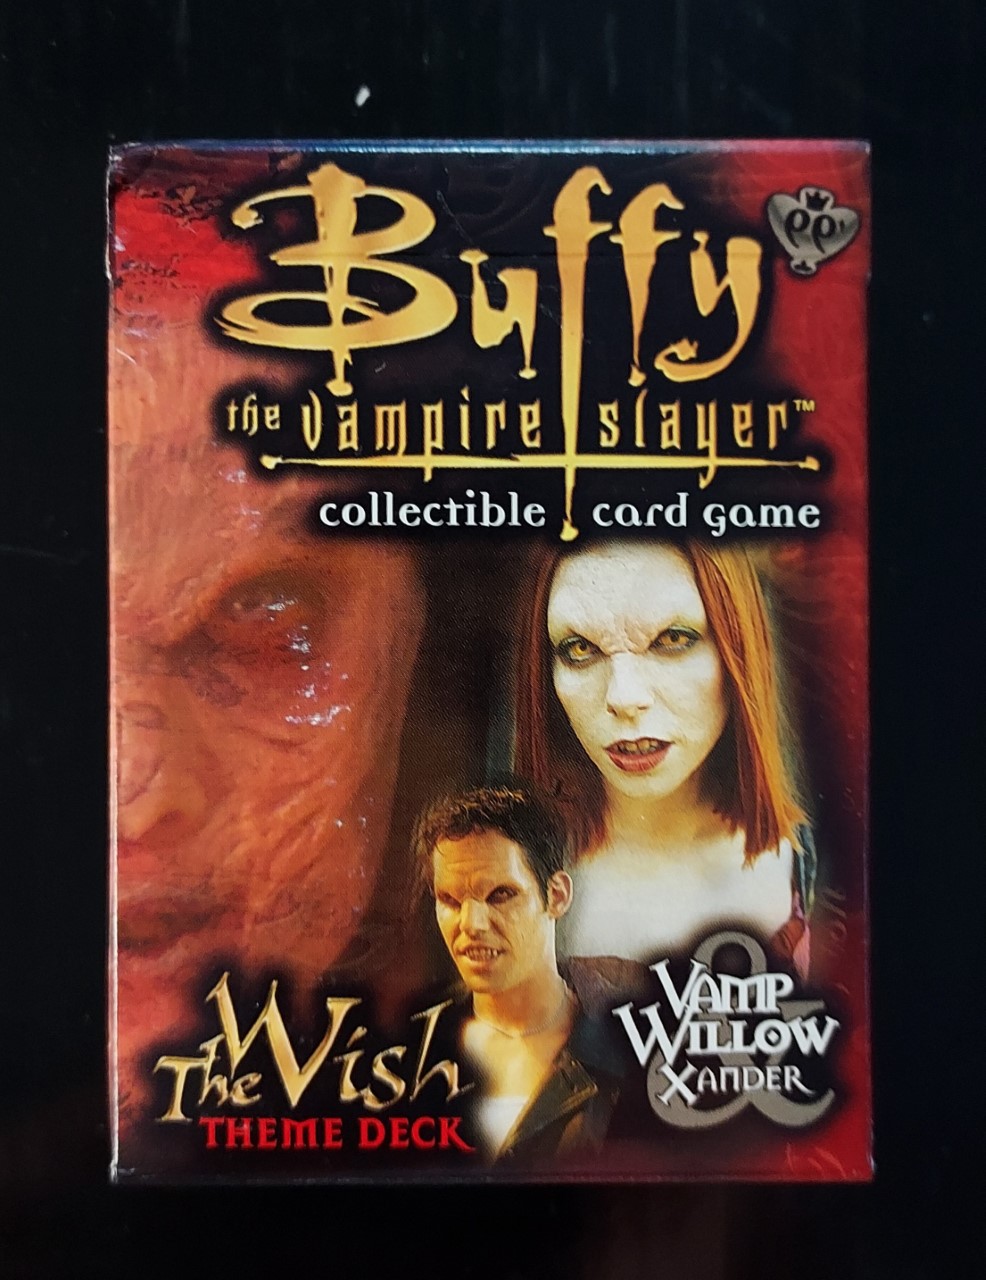 Image of the Buffy the Vampire Slayer Card Game